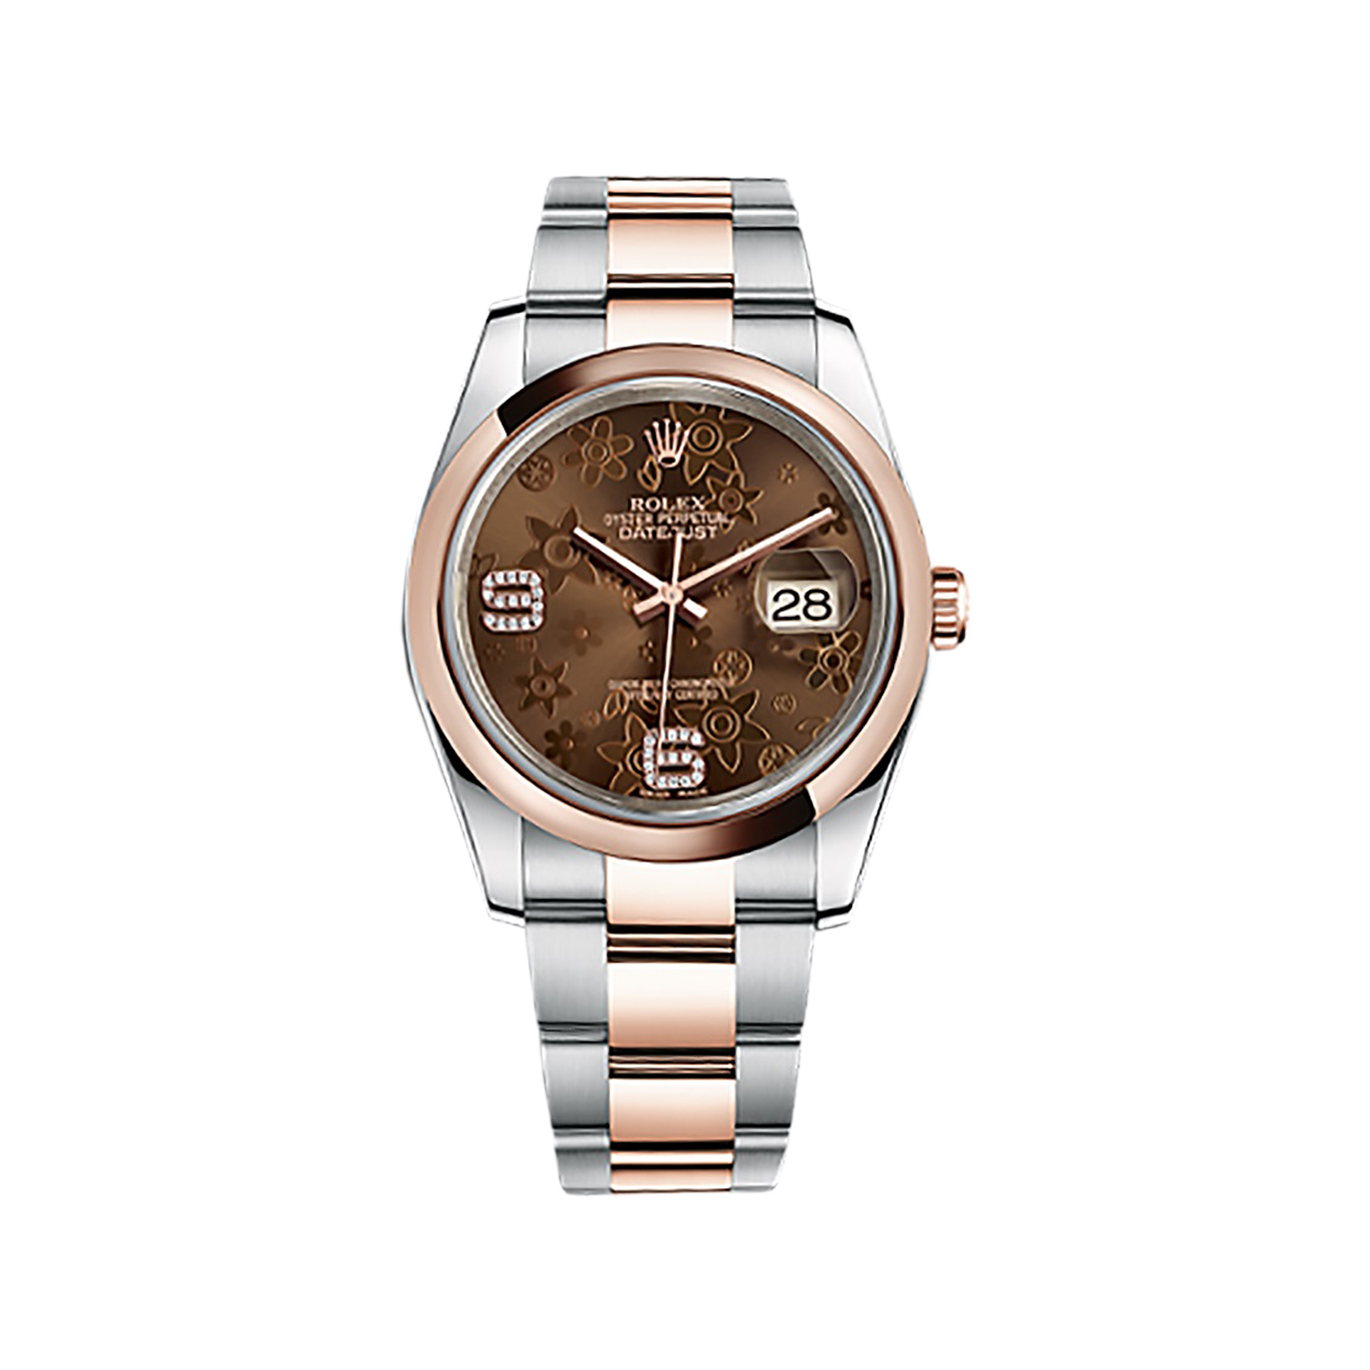 Datejust 36 116201 Rose Gold & Stainless Steel Watch (Chocolate Floral Motif Set with Diamonds) - Click Image to Close